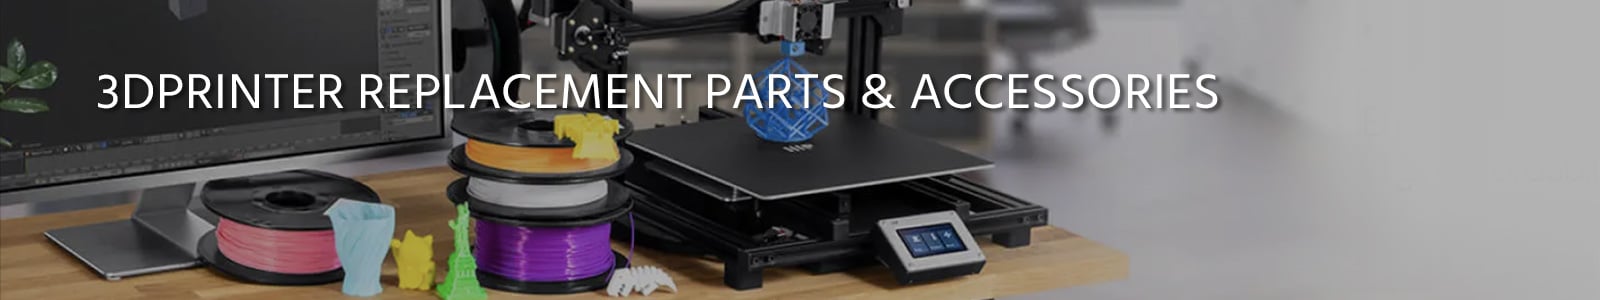 3DPrinter Replacement Parts & Accessories